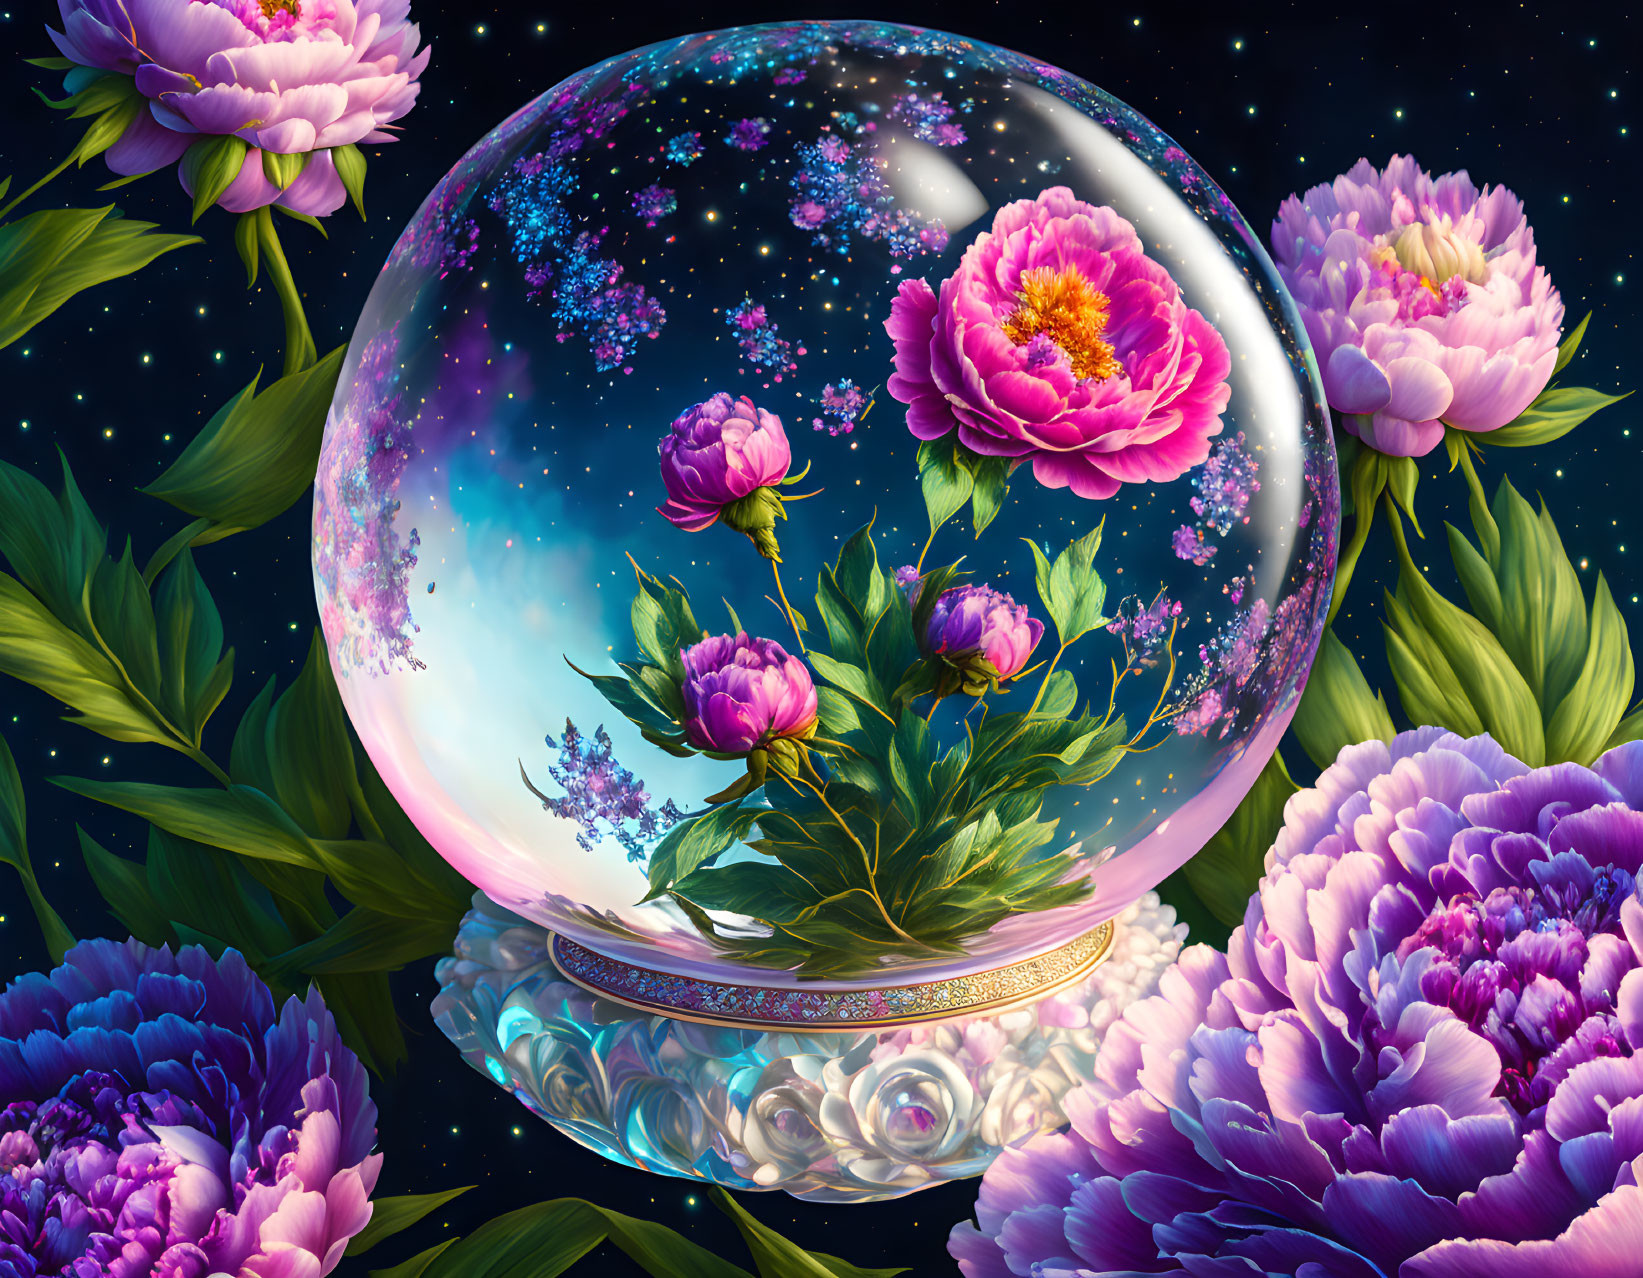 Colorful digital artwork: Peonies, crystal ball, galaxy, blossoms on starry night